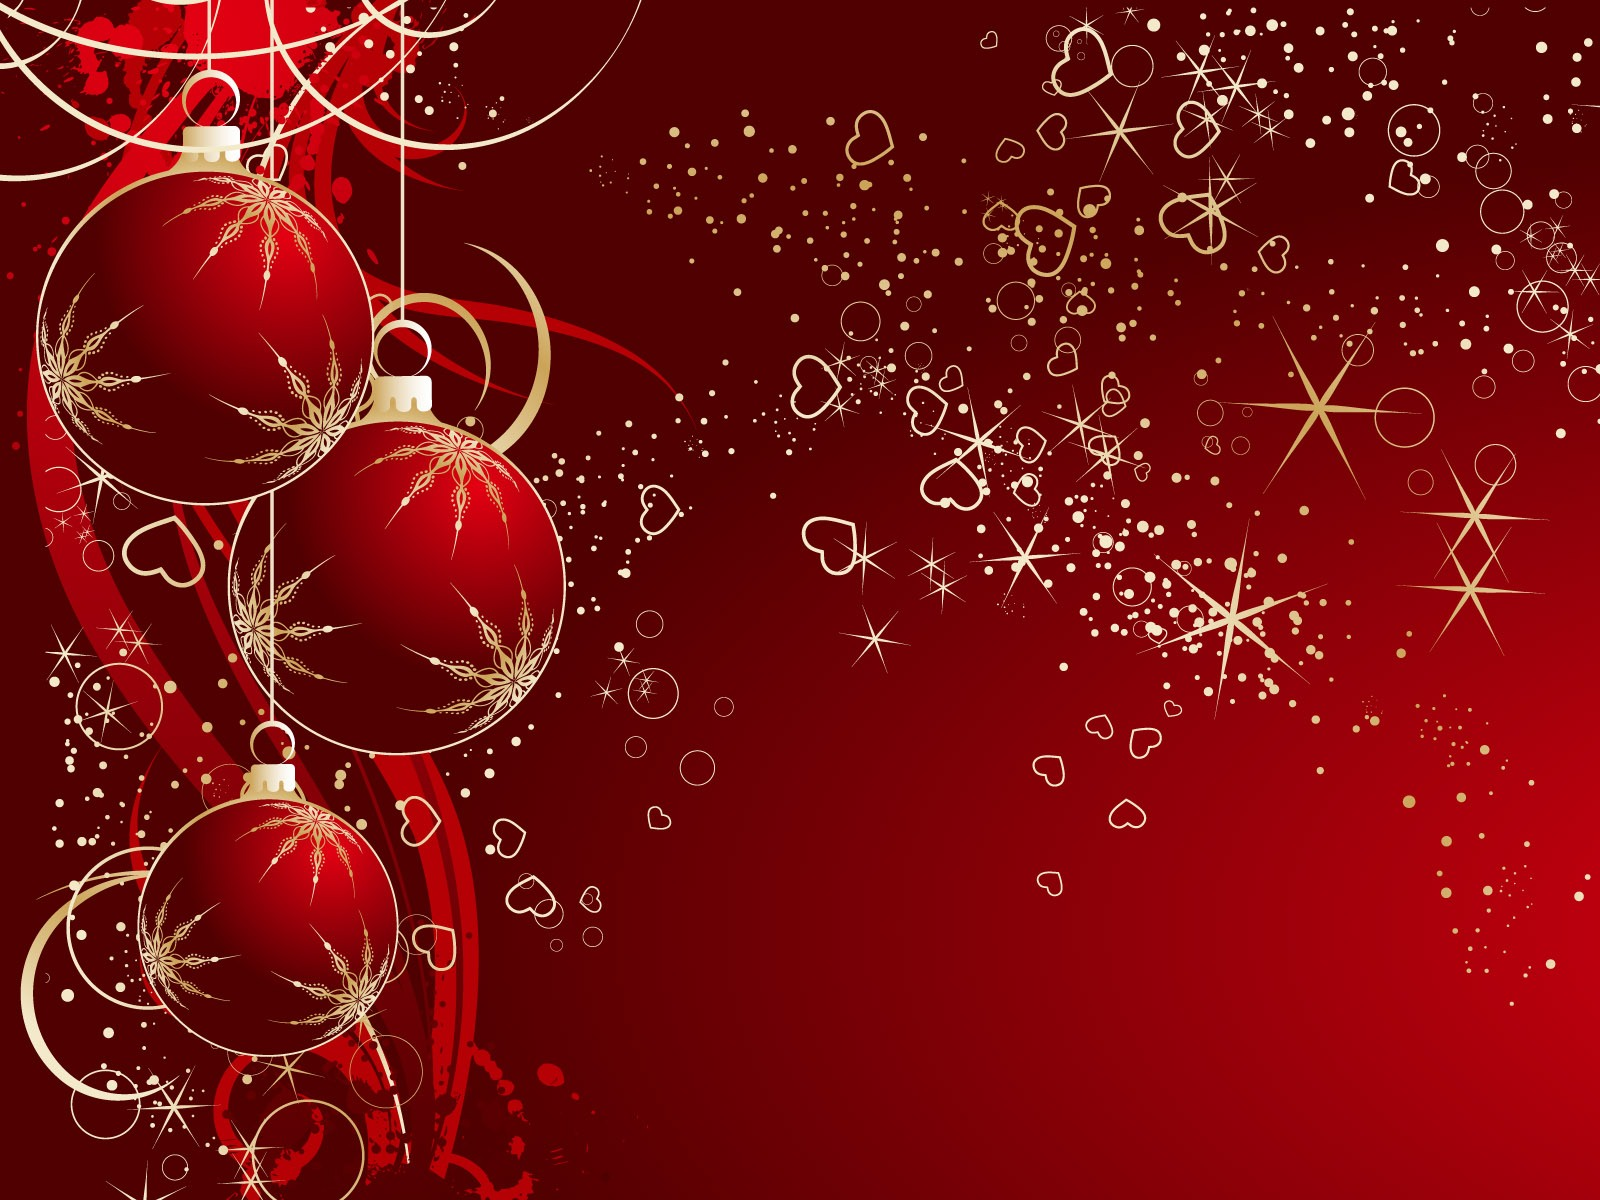 FreePhotoz Daily Wallpapers & Backgrounds - Red Christmas ...